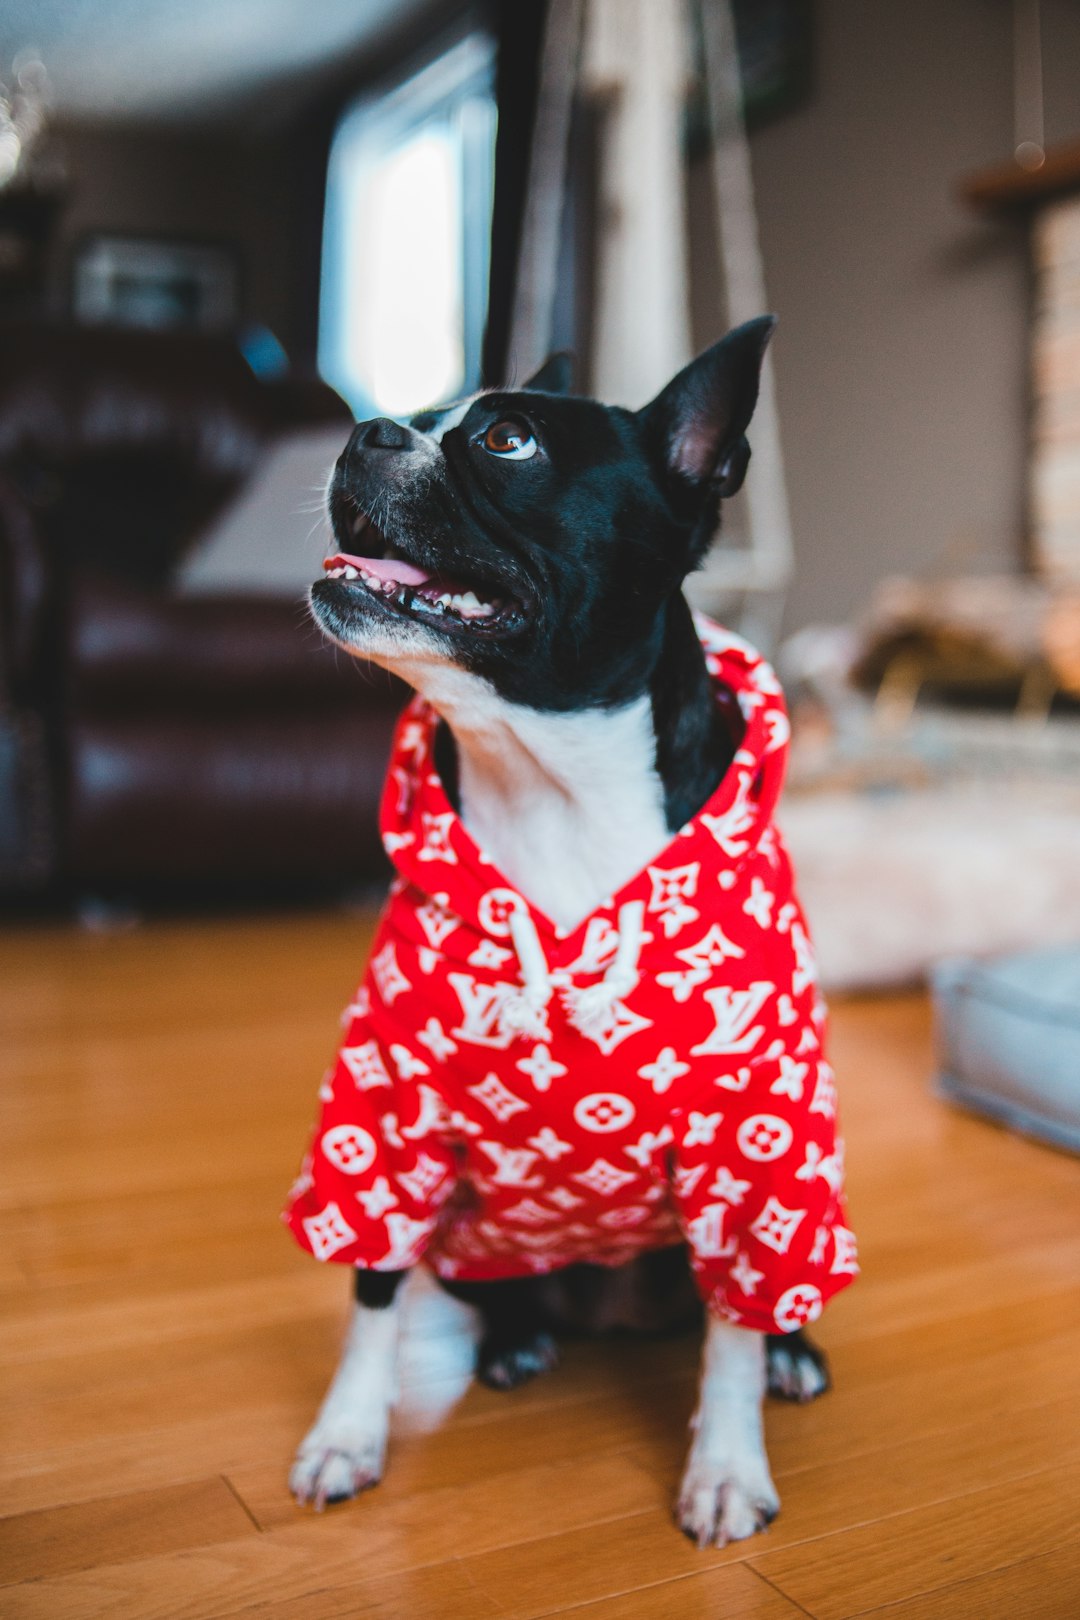 black and white short coated dog wearing red and white polka dot shirt